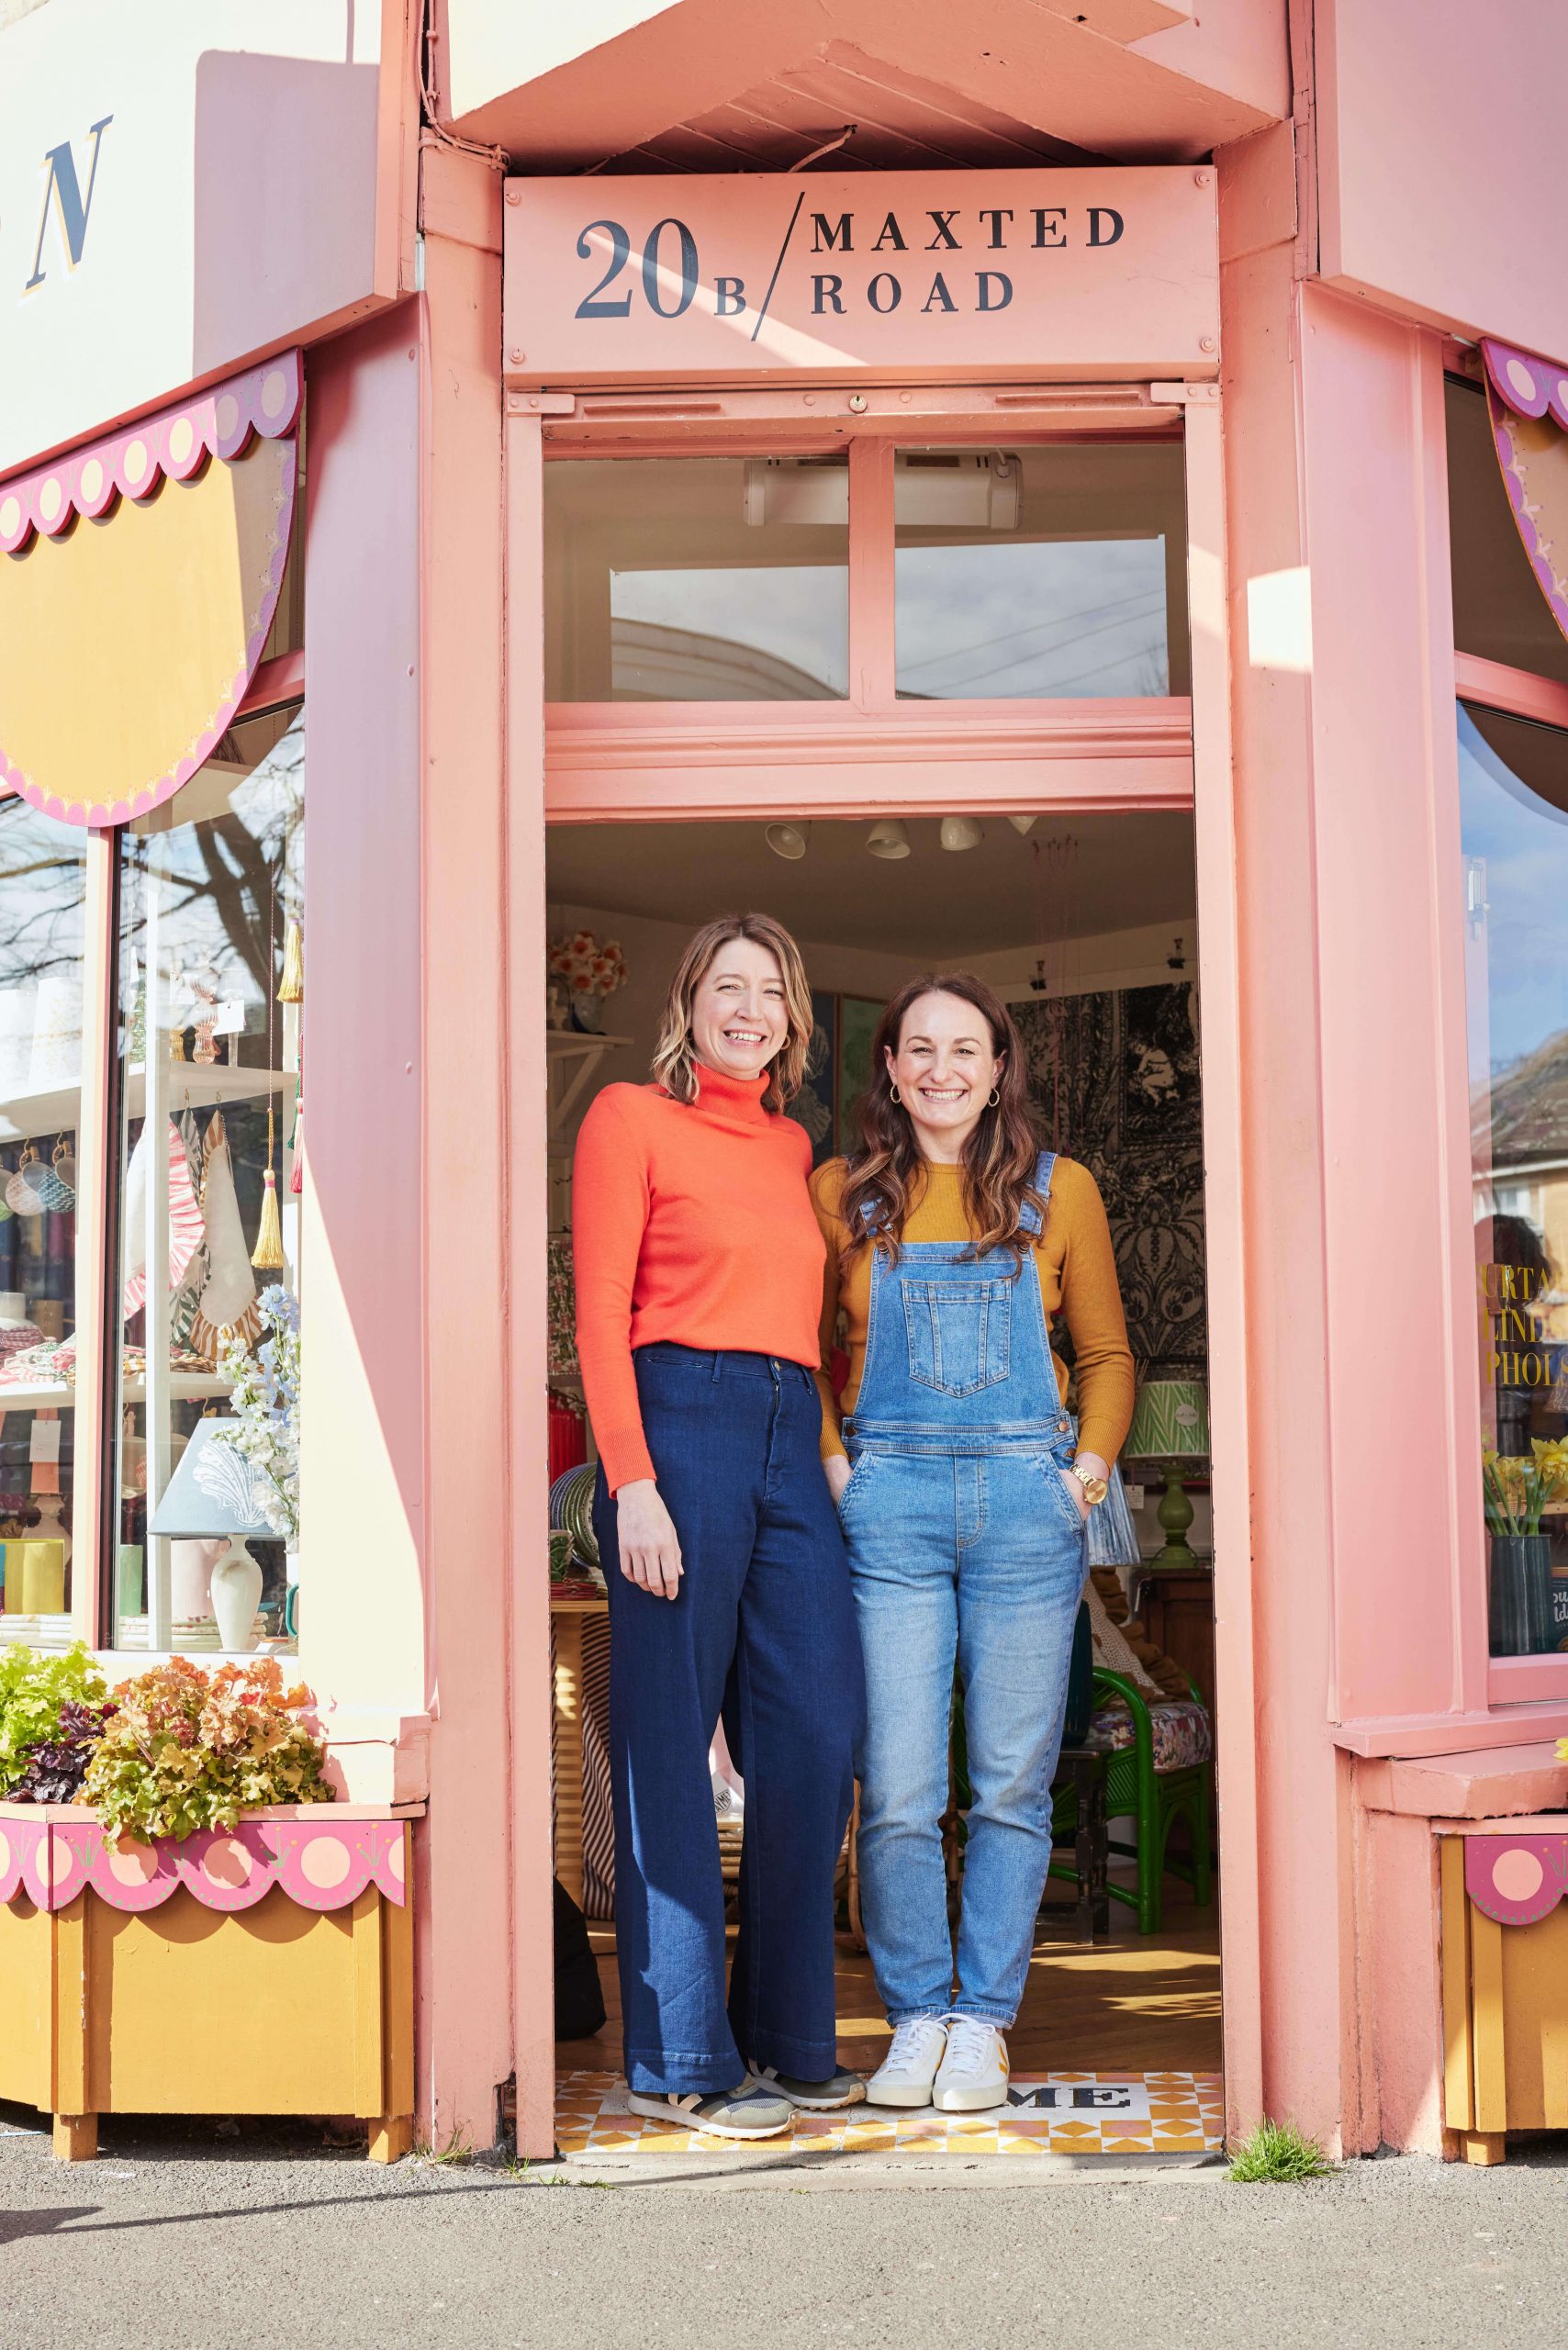 Independent london shop owners Anna and Lotte outside LAMP LDN Peckham